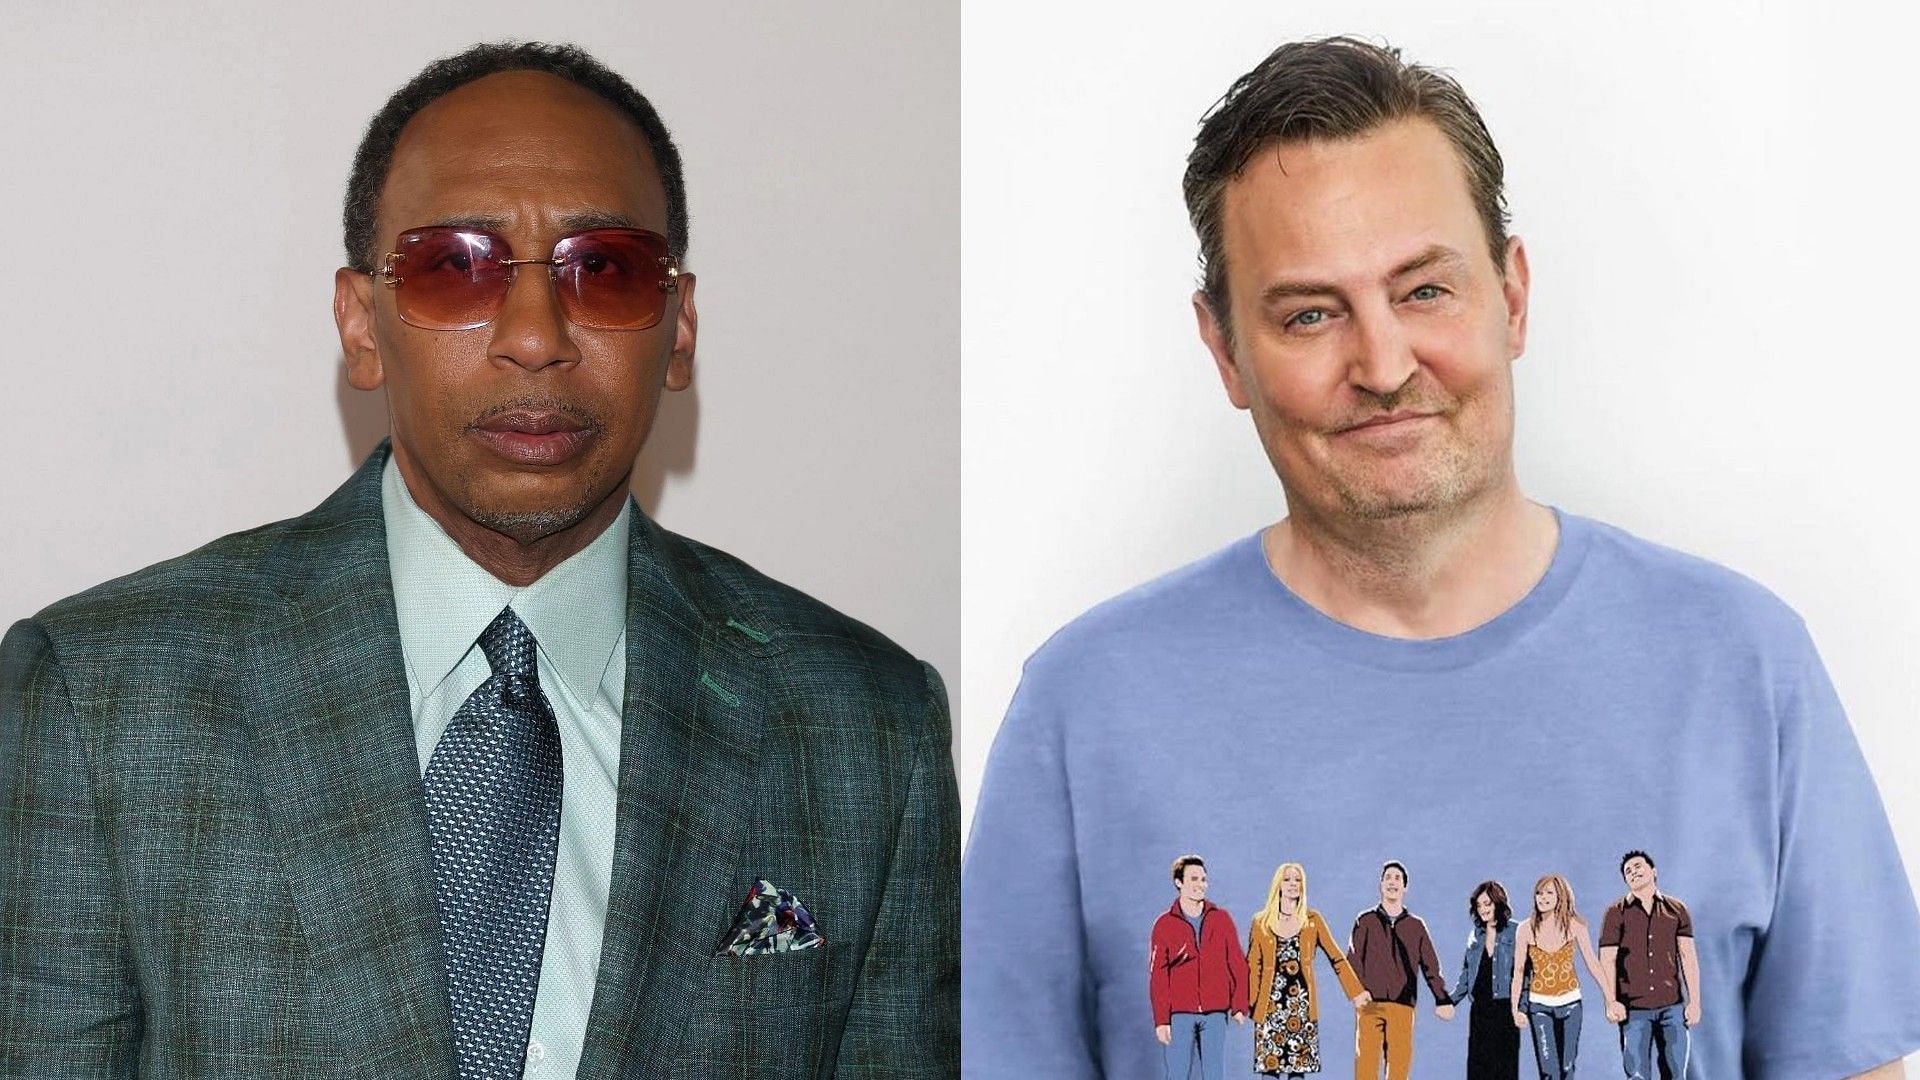 Stephen A. Smith speaks out on &lsquo;Friends&rsquo; star Matthew Perry&rsquo;s passing  - Courtesy of Matthew Perry on Instagram